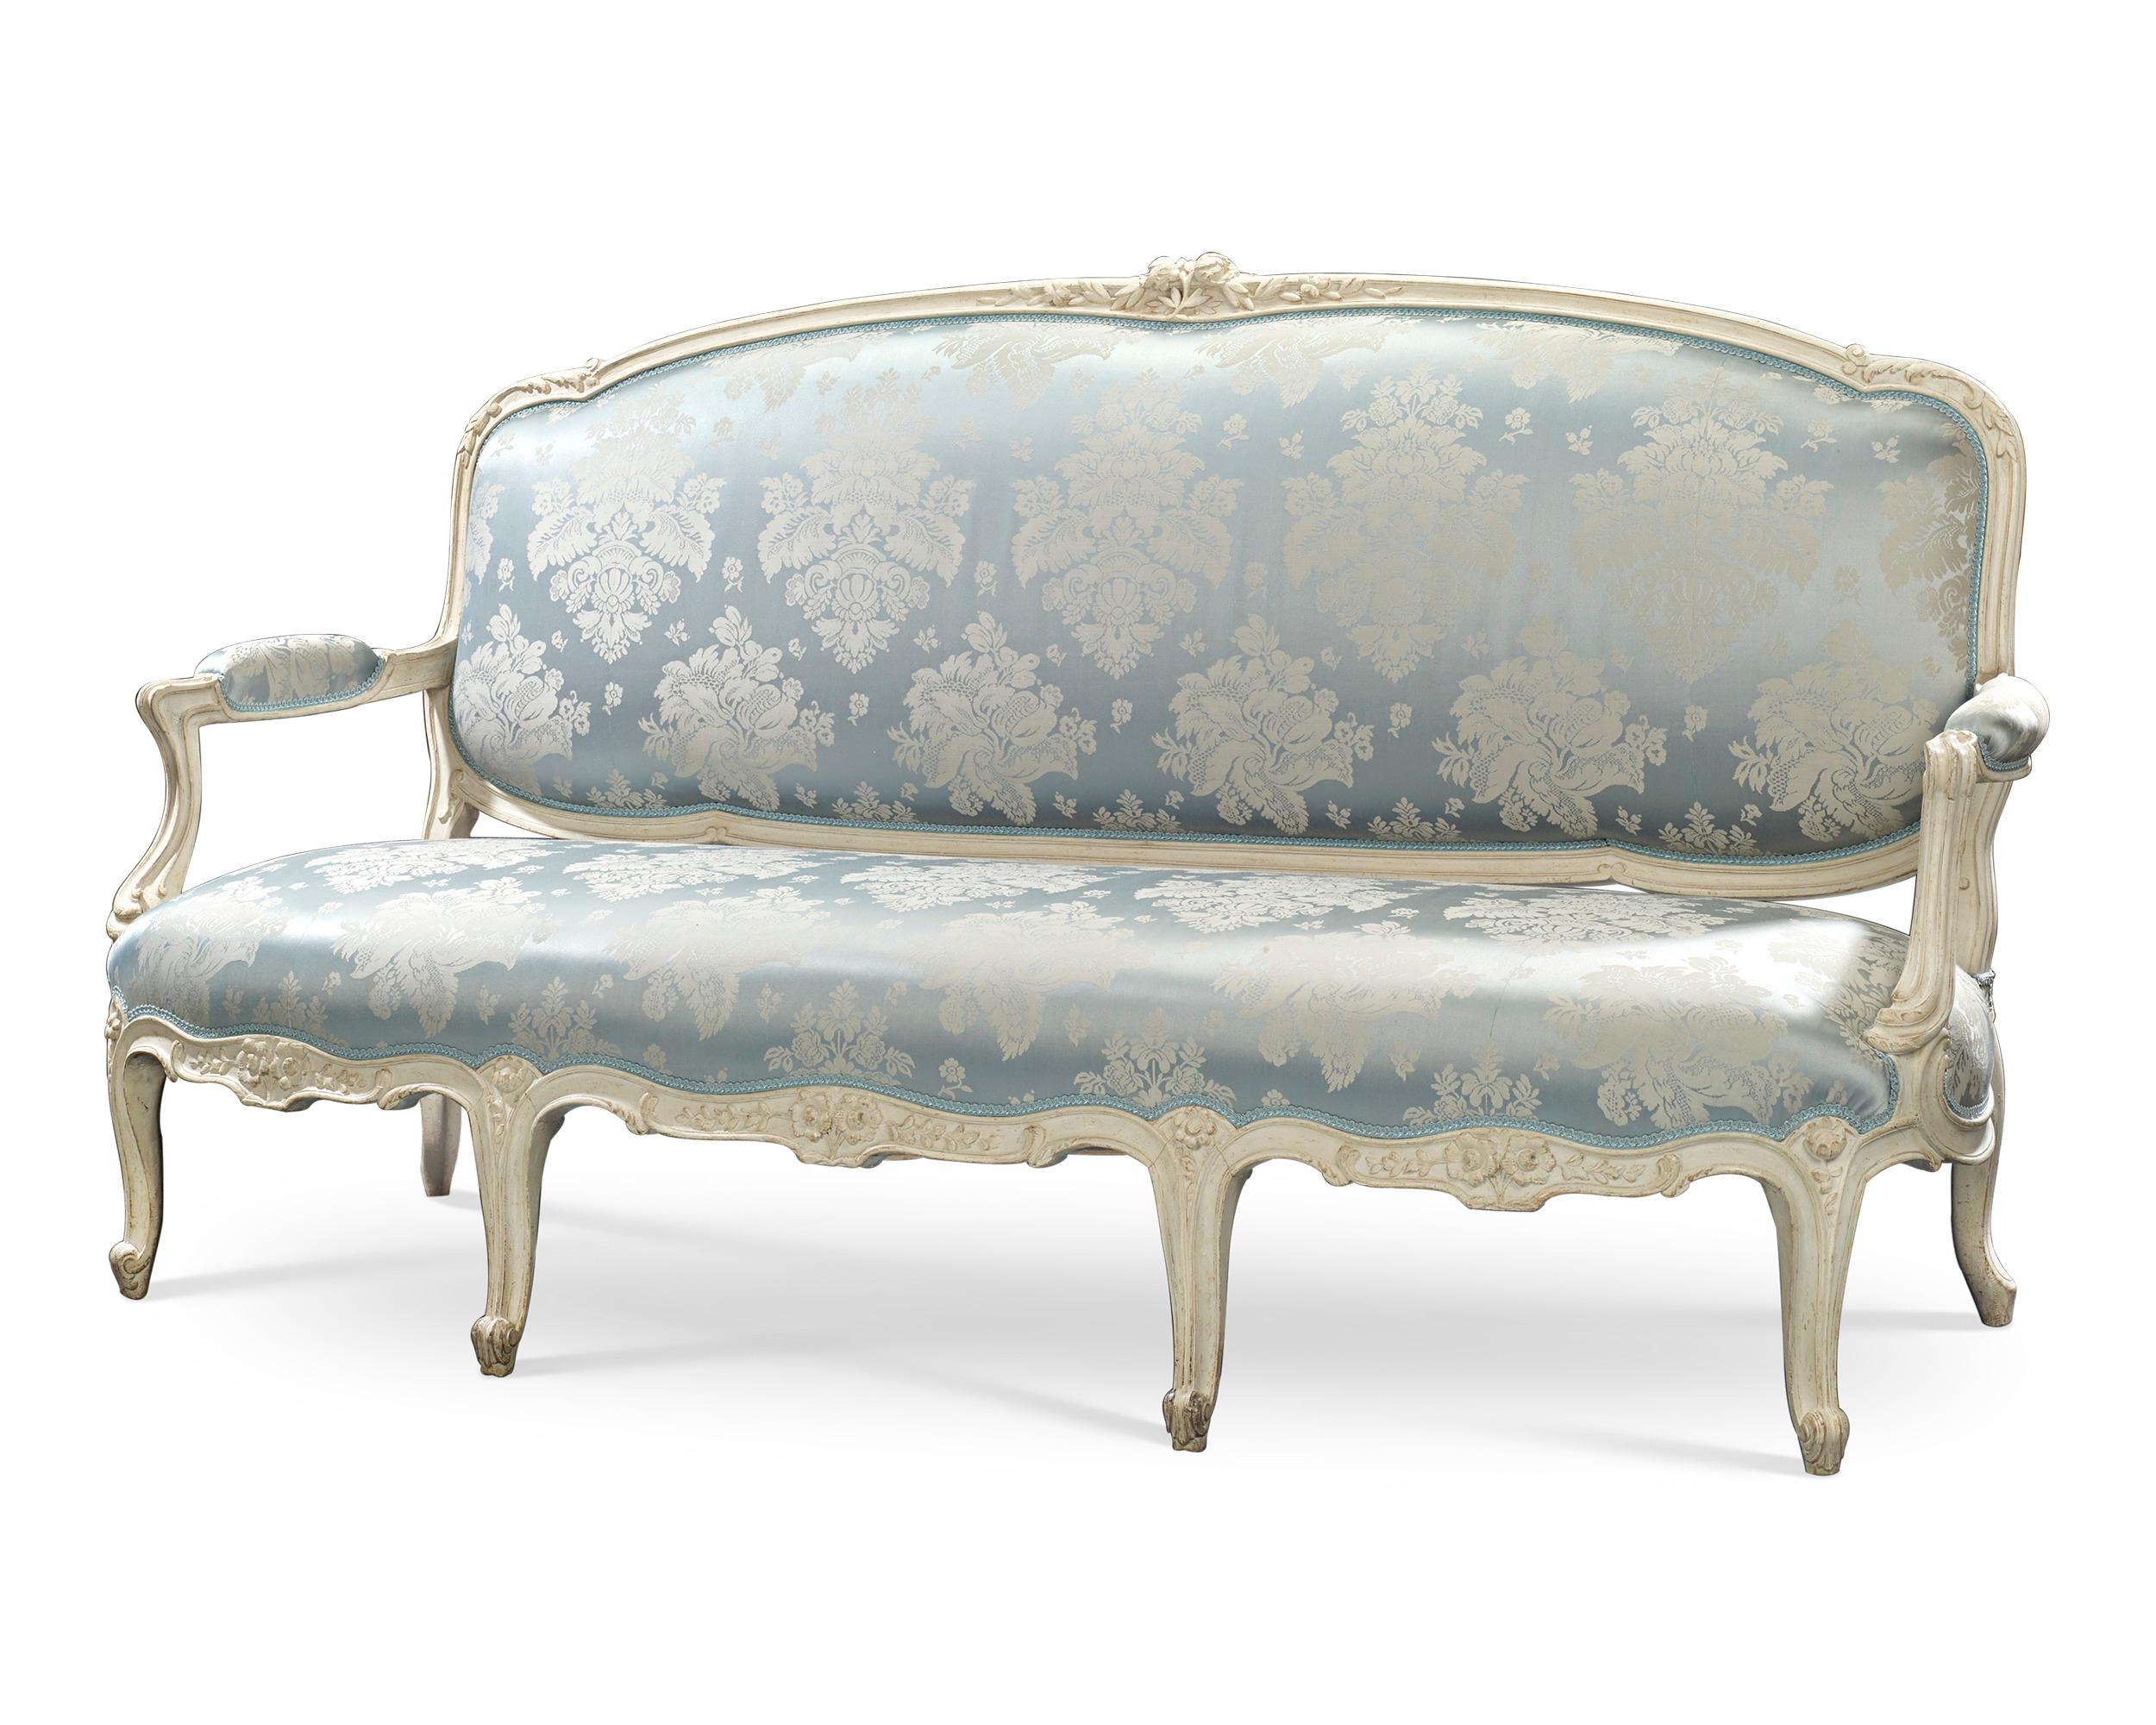 The splendor of the Louis XV period is captured in this incredible settee by the famed ébéniste Jean-René Nadal l'Ainé (1733-1783). Beautifully upholstered in blue and white fabric that complements the white of the wood, the rare sofa reflects the